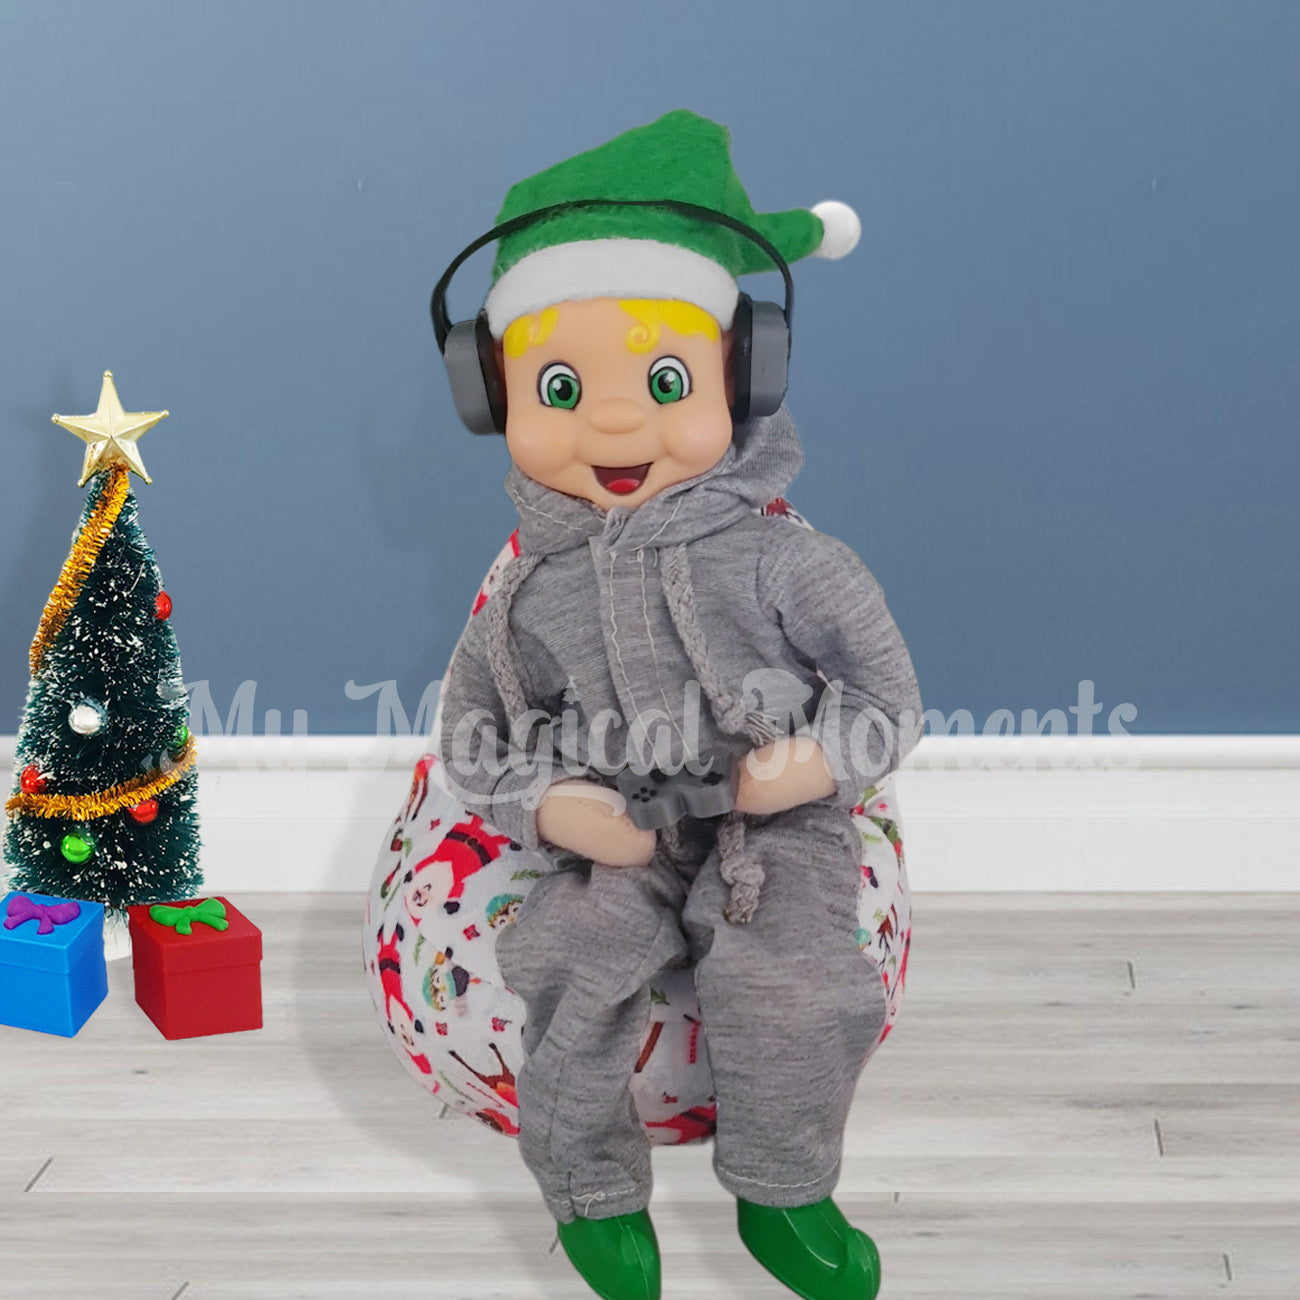 Elf wearing trackies and headphones. Sitting on a miniature bean bag playing a game